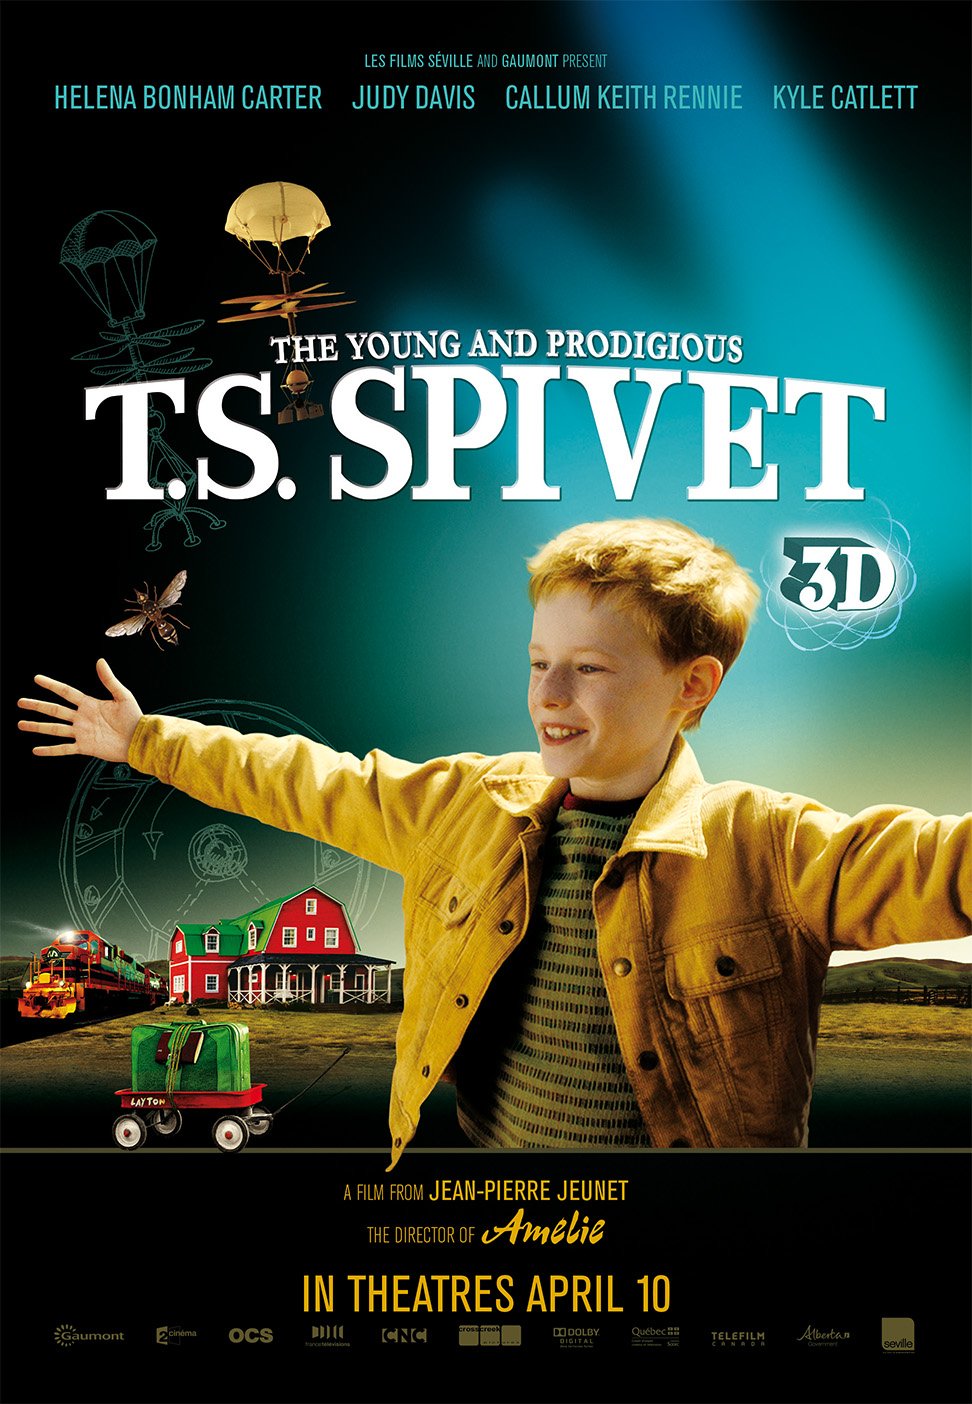 Poster of the movie The Young and Prodigious T.S. Spivet